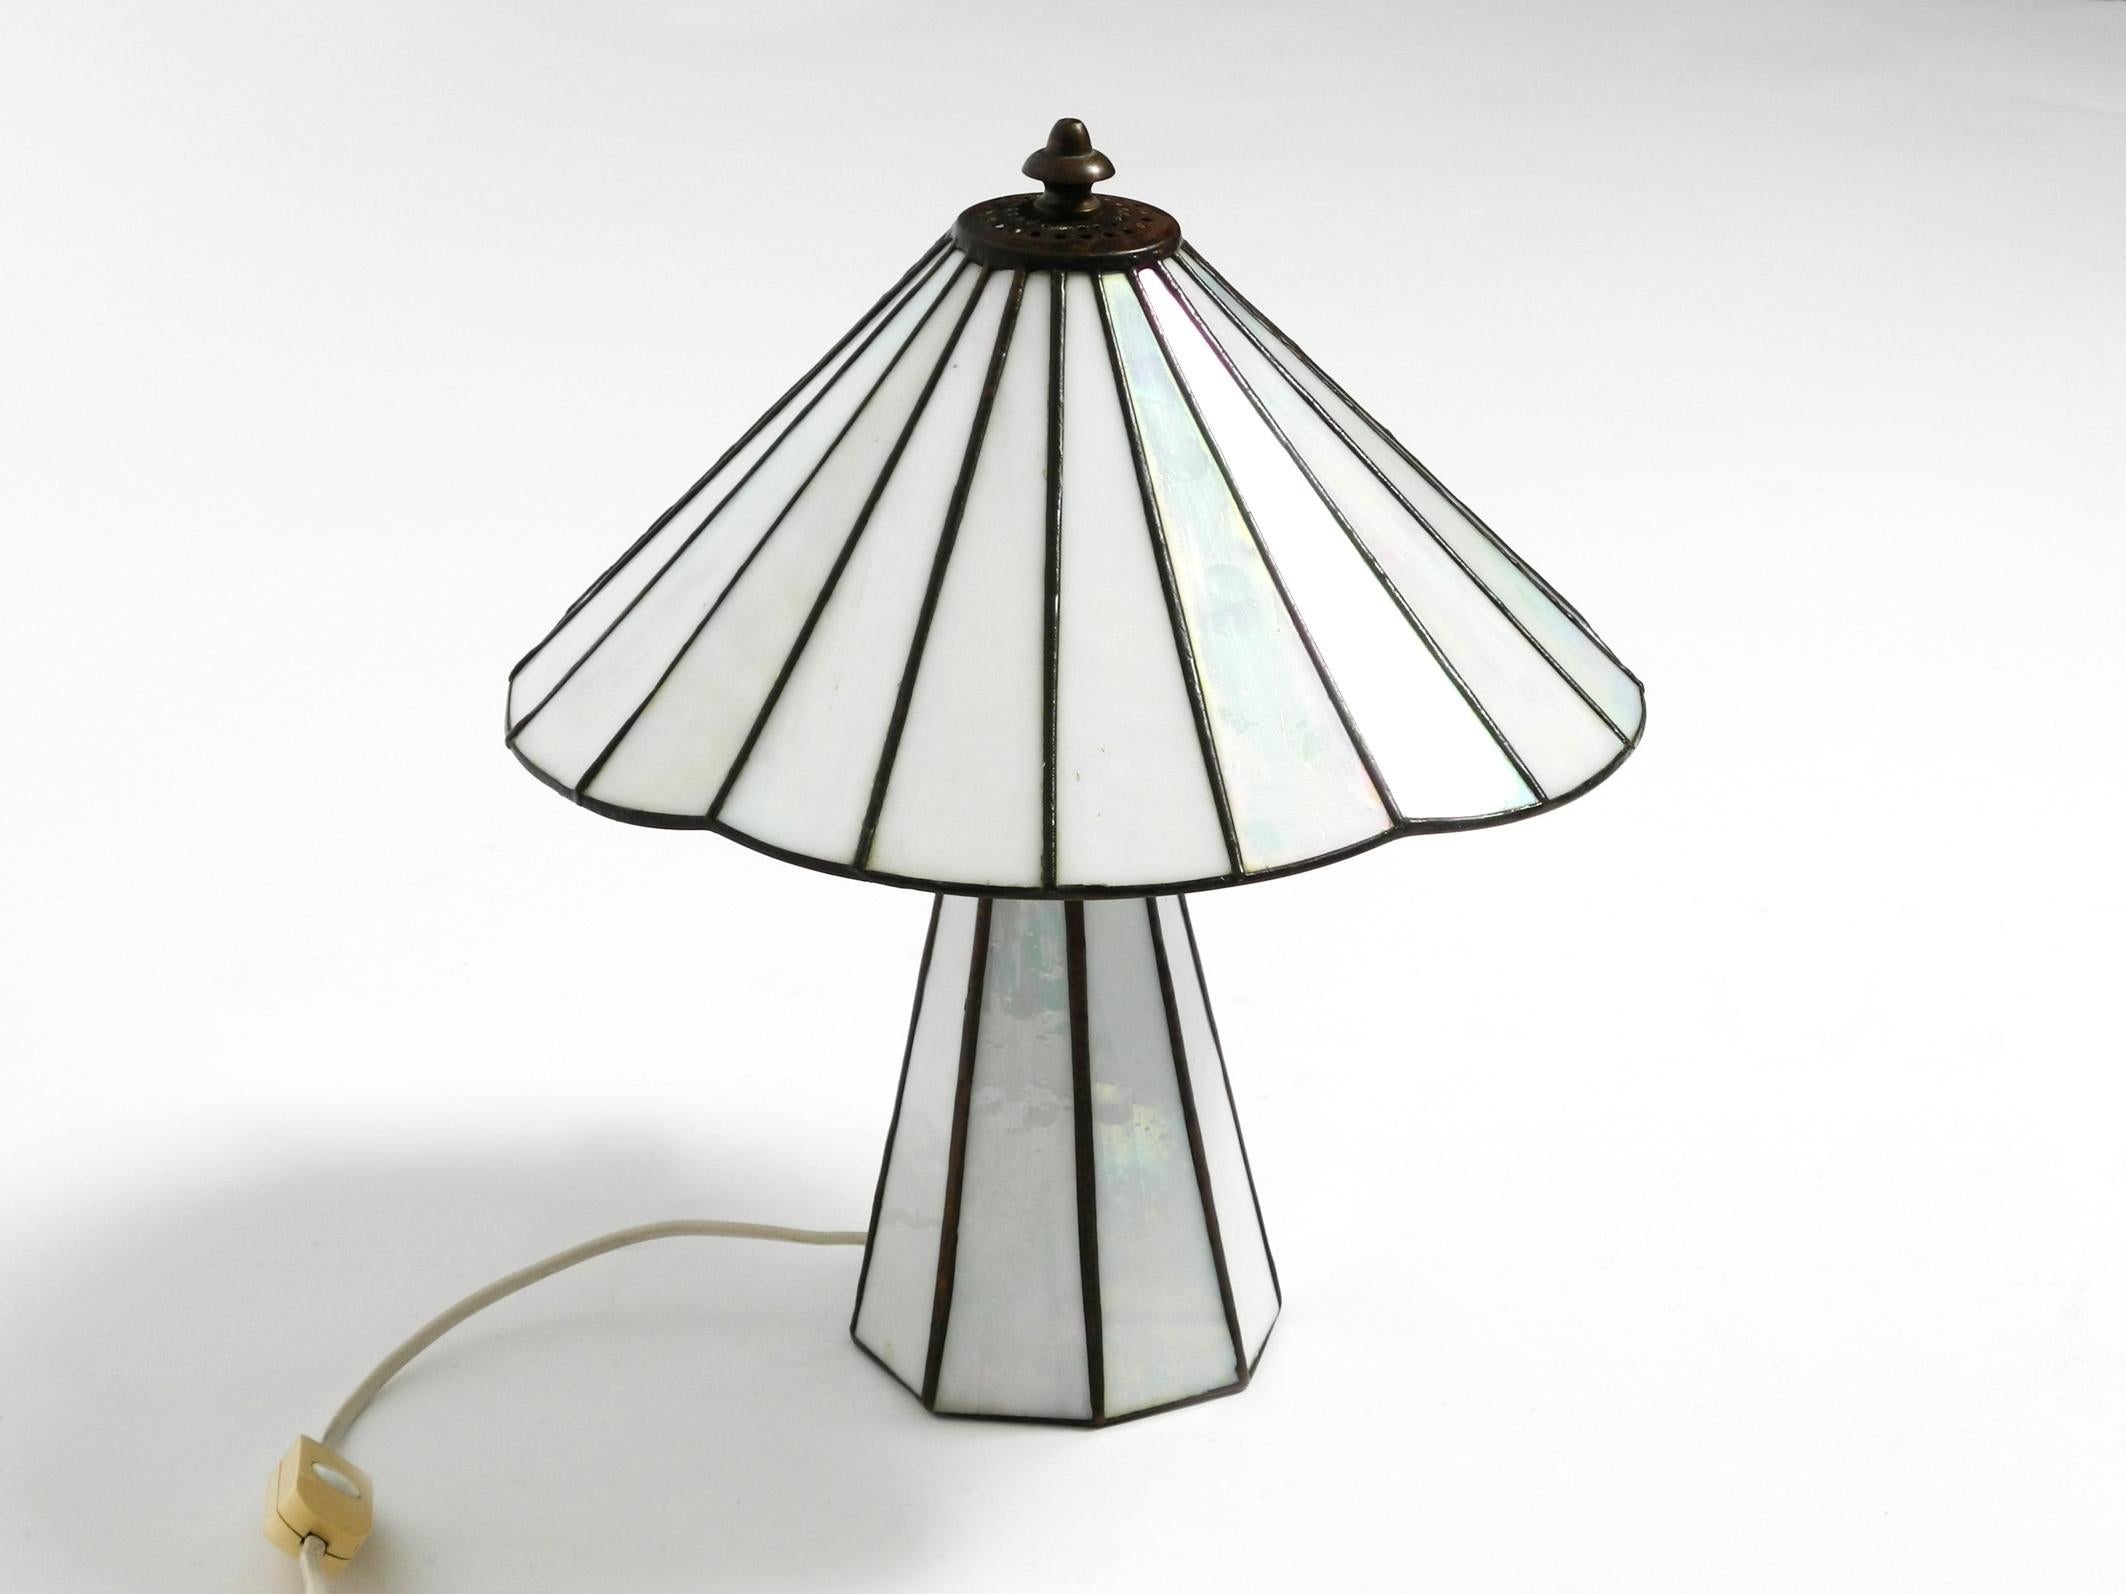 Beautiful little 1970s Tiffany design table lamp for the living room or as a bedside lamp.
Entire lamp is made of fine metal and mother-of-pearl glass.
The mother-of-pearl glass shimmers in different colors when the light is off.
No damage to the